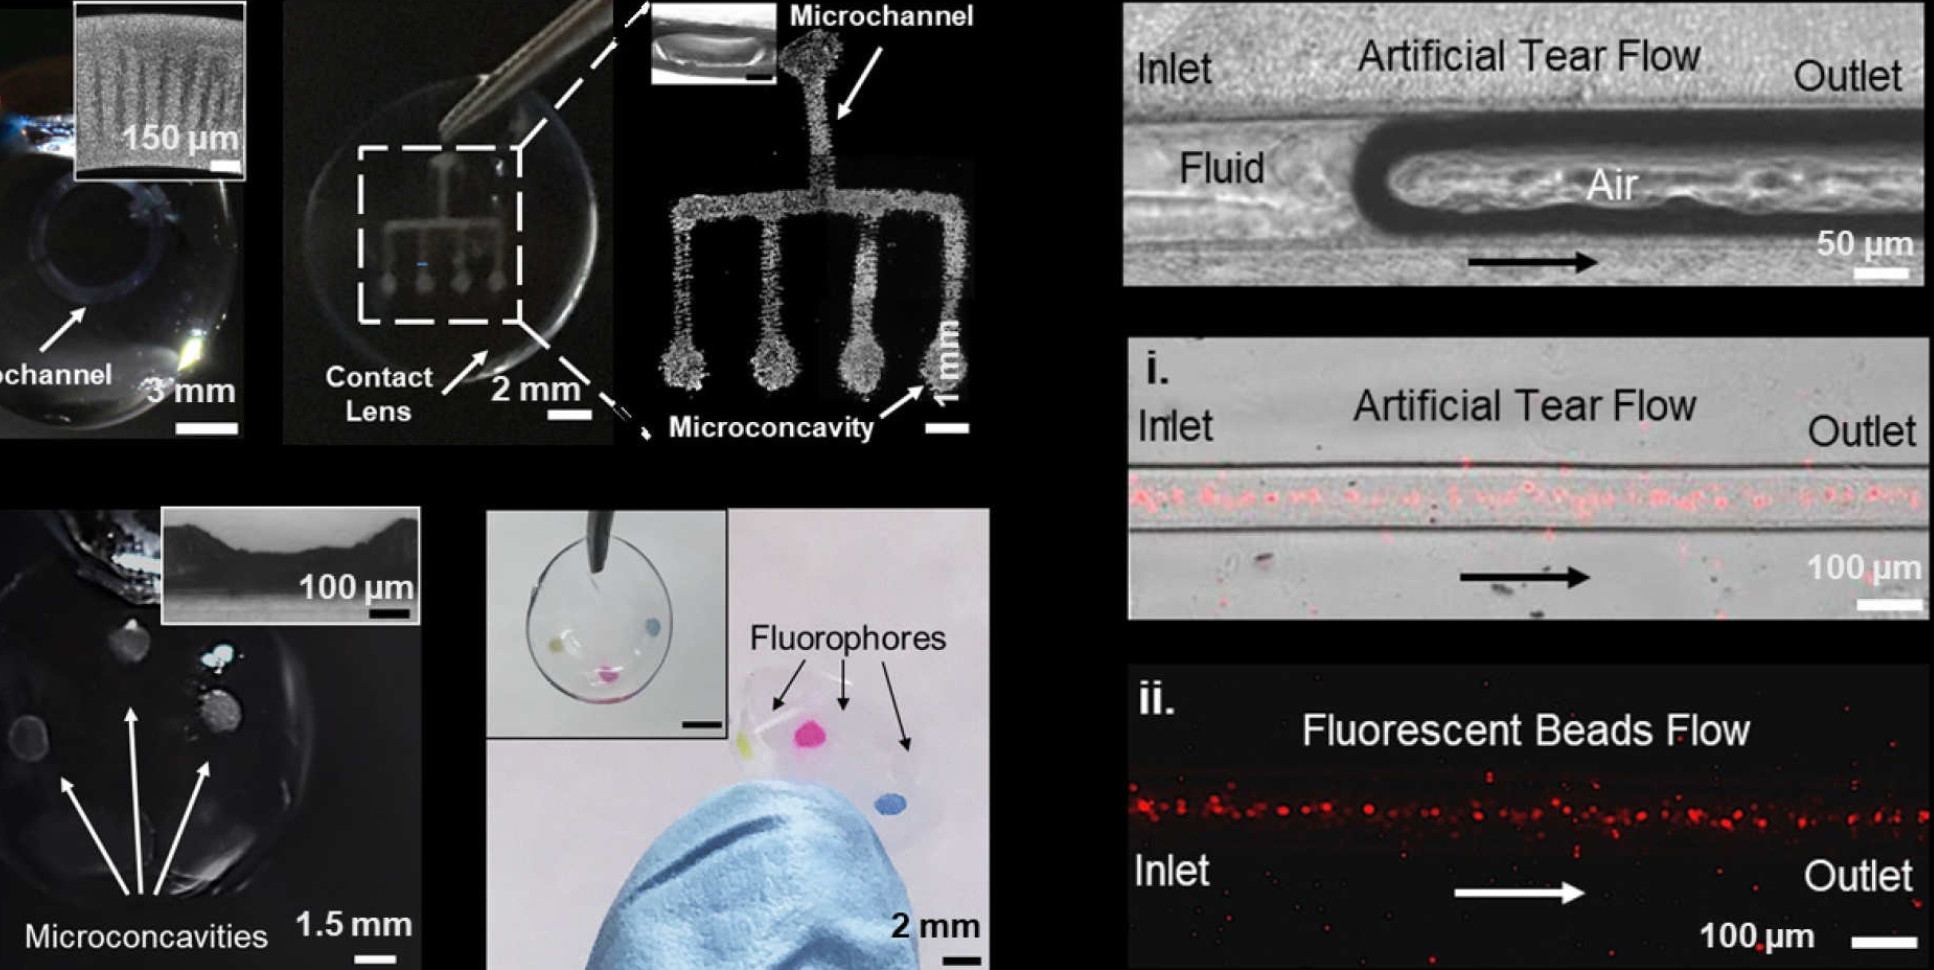 Images of microfluidic contact lenses showing microscale channels to transport fluids